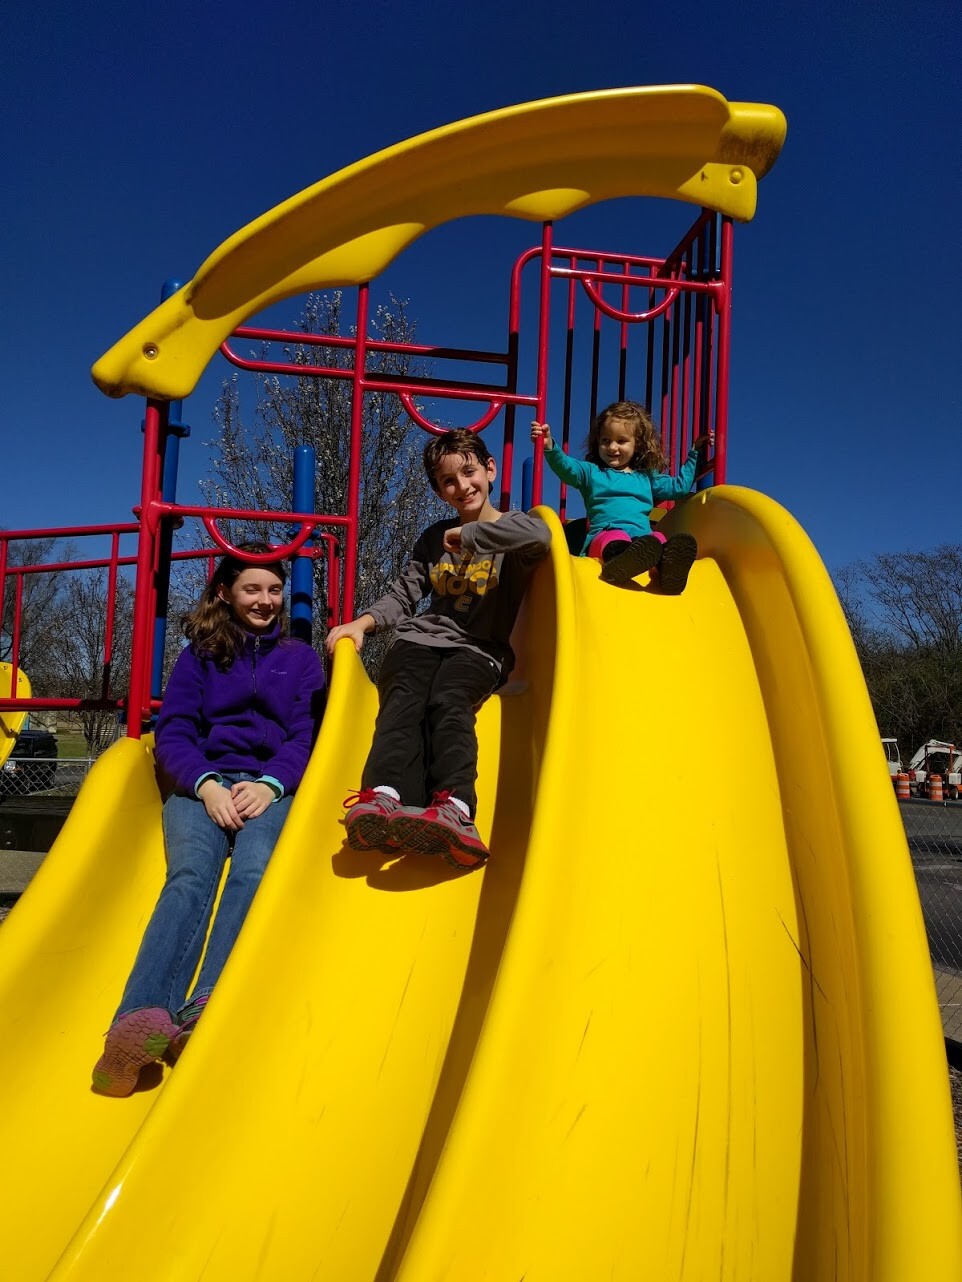 my 3 kids playing on a playground